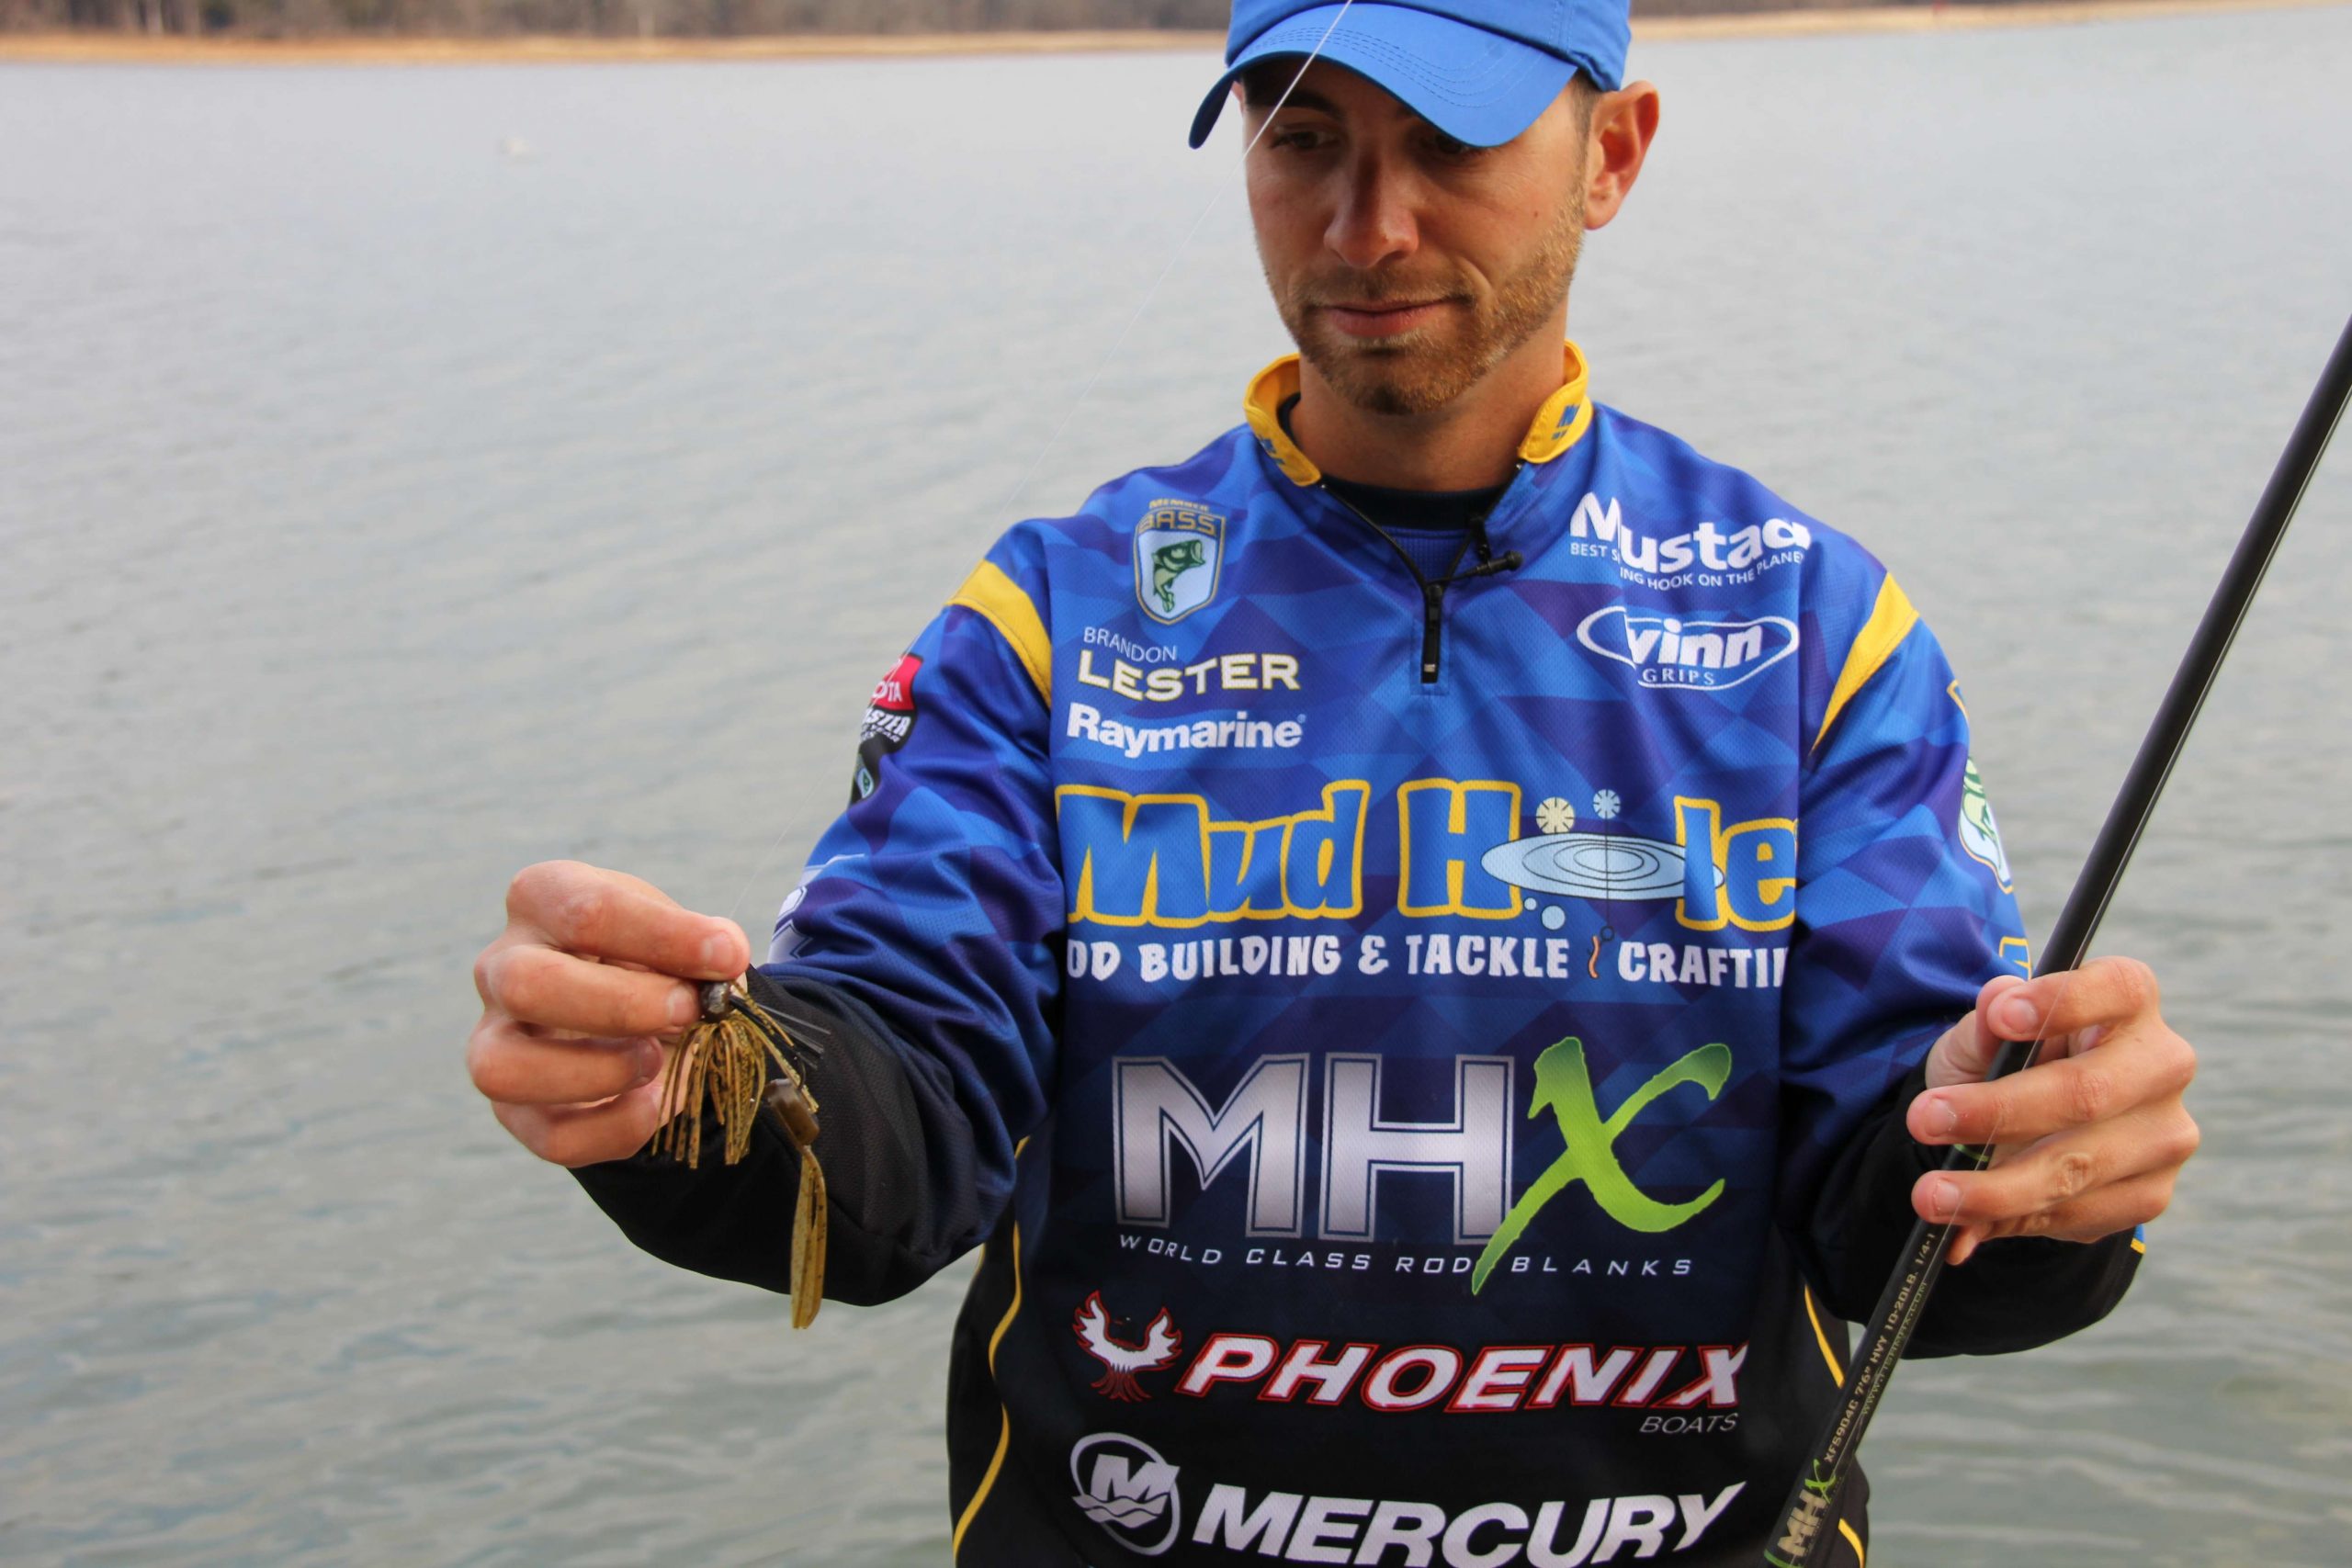 While Lester believes the biggest fish from most ledge schools prefer moving baits, he said the jig is good for âmore of the 3- to 4-pound fish that make up the heart of the school.â